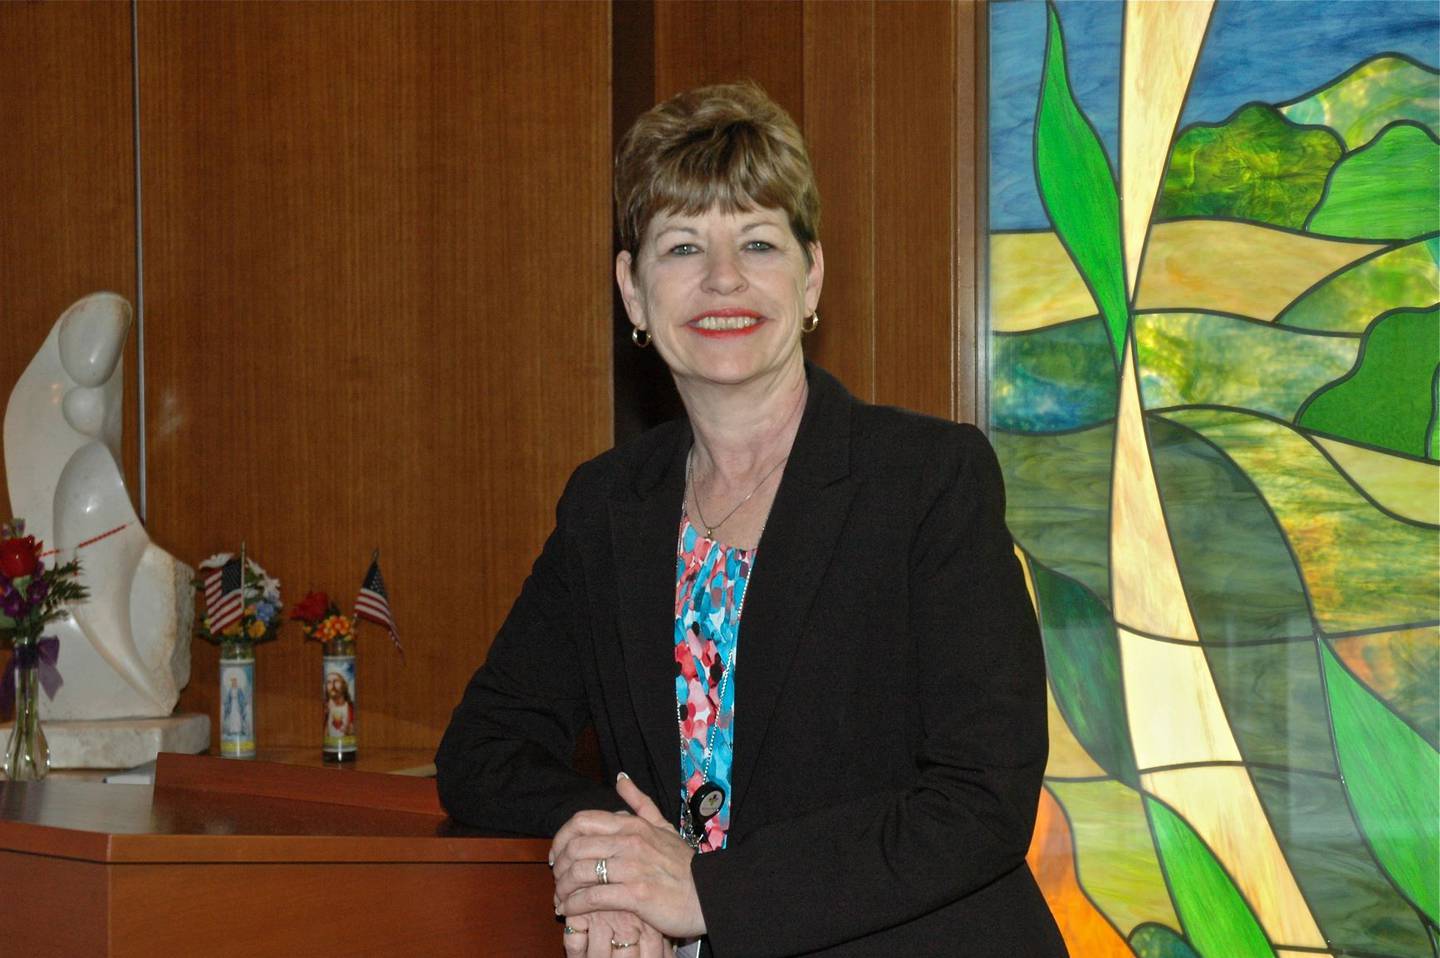 Barbara Manning is a board-certified chaplain at Silver Cross Hospital in New Lenox. During the past six years, Manning, a former administrative assistant at Silver Cross, has been part of a team helping to heal body, mind and soul for patients, families and staff.